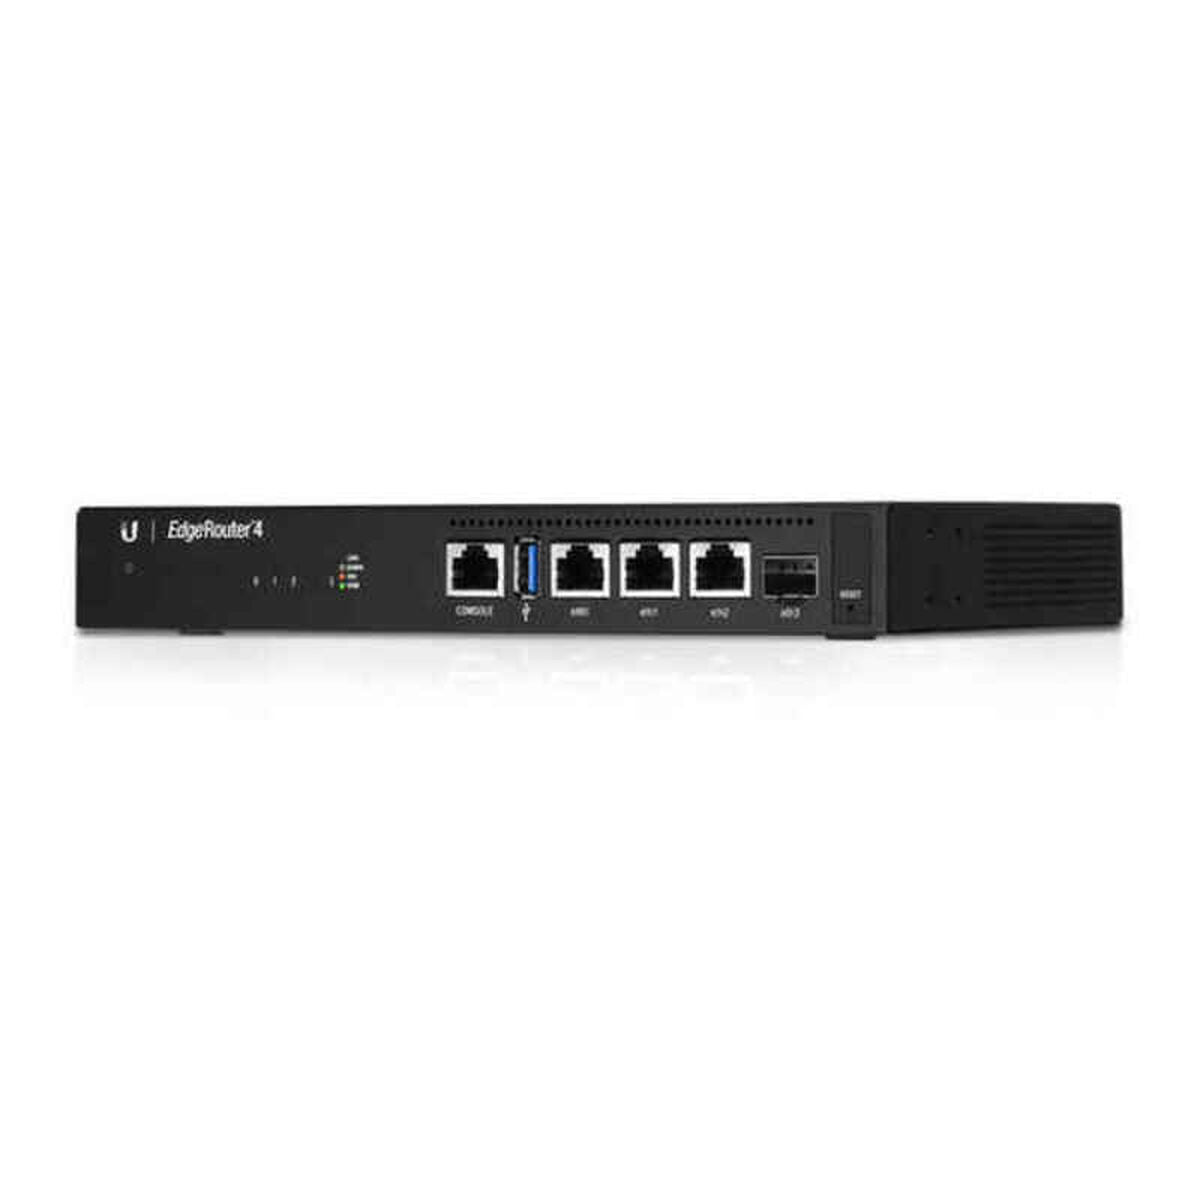 Router UBIQUITI ER-4 1000 Mbps Black, UBIQUITI, Computing, Network devices, router-ubiquiti-er-4-1000-mbps-black, Brand_UBIQUITI, category-reference-2609, category-reference-2803, category-reference-2826, category-reference-t-19685, category-reference-t-19914, category-reference-t-21371, Condition_NEW, networks/wiring, Price_200 - 300, Teleworking, RiotNook